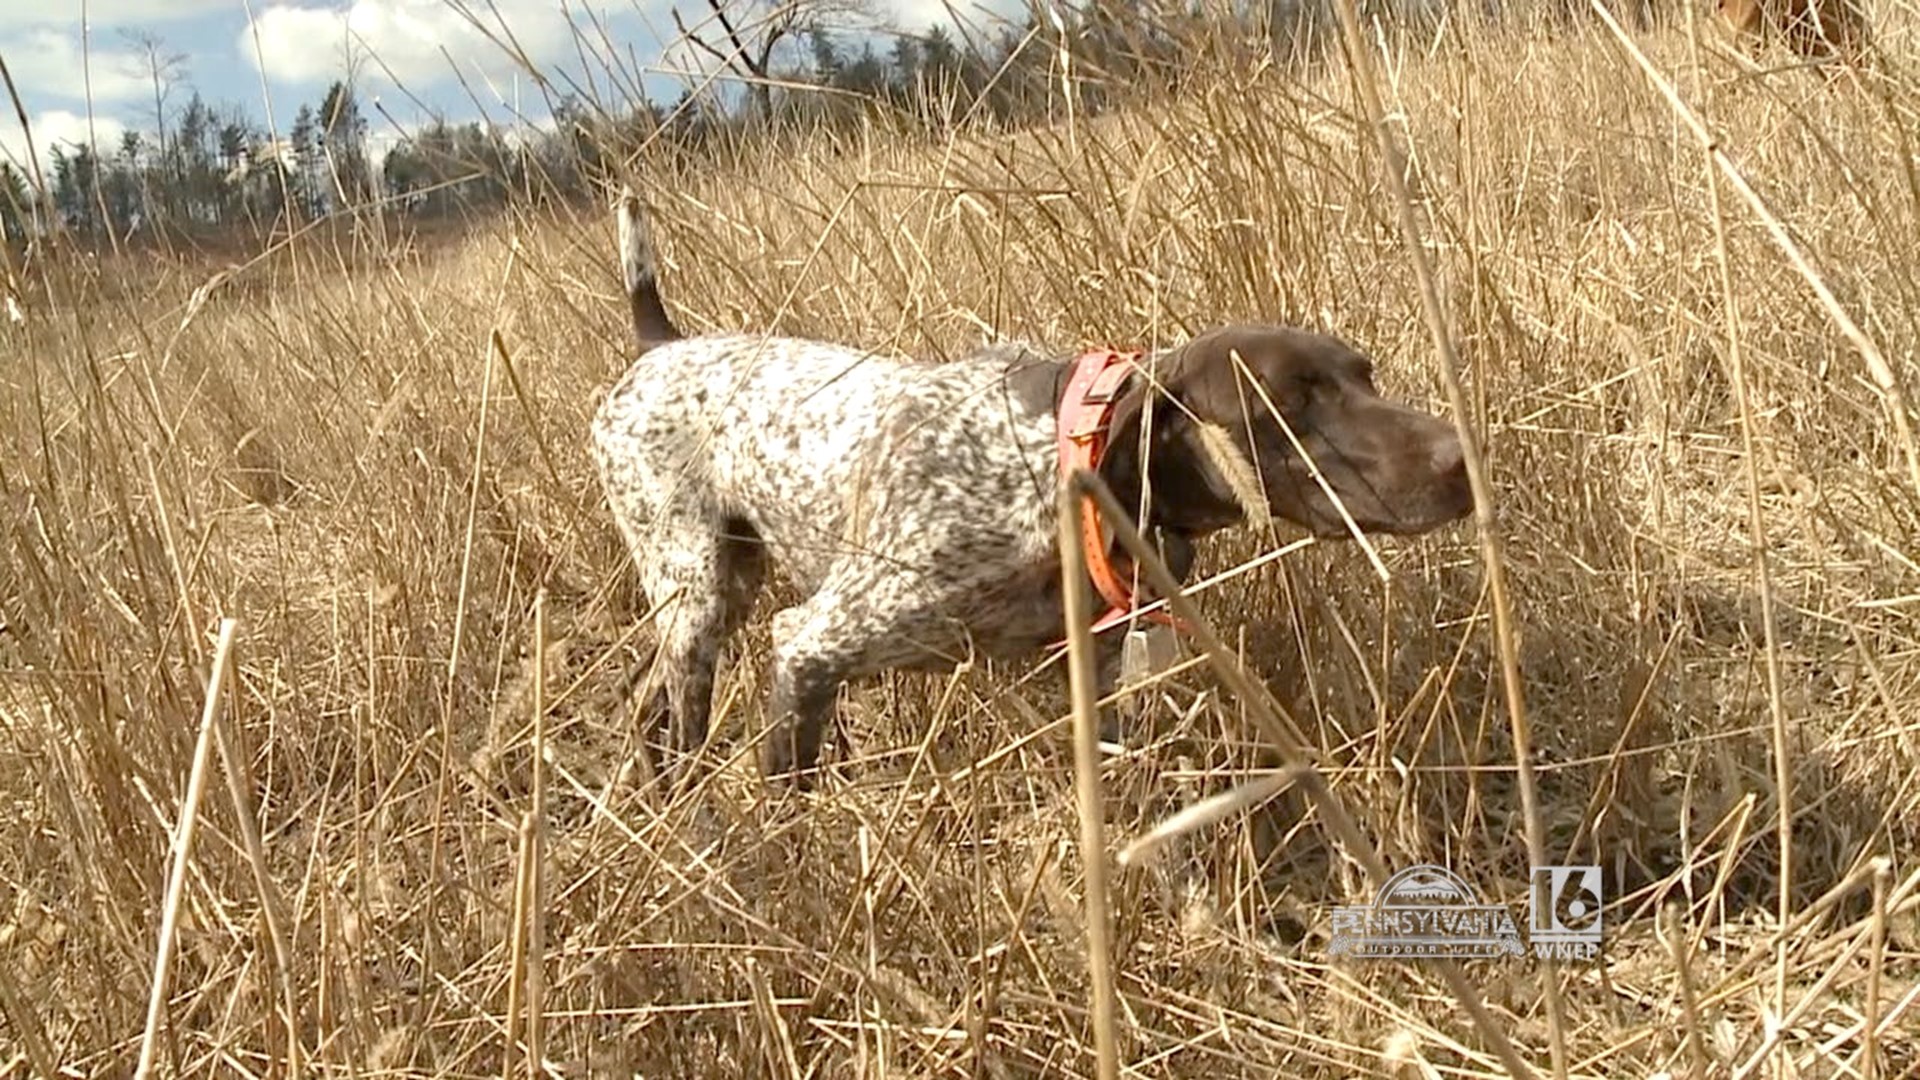 See some of the best hunting dogs in action.